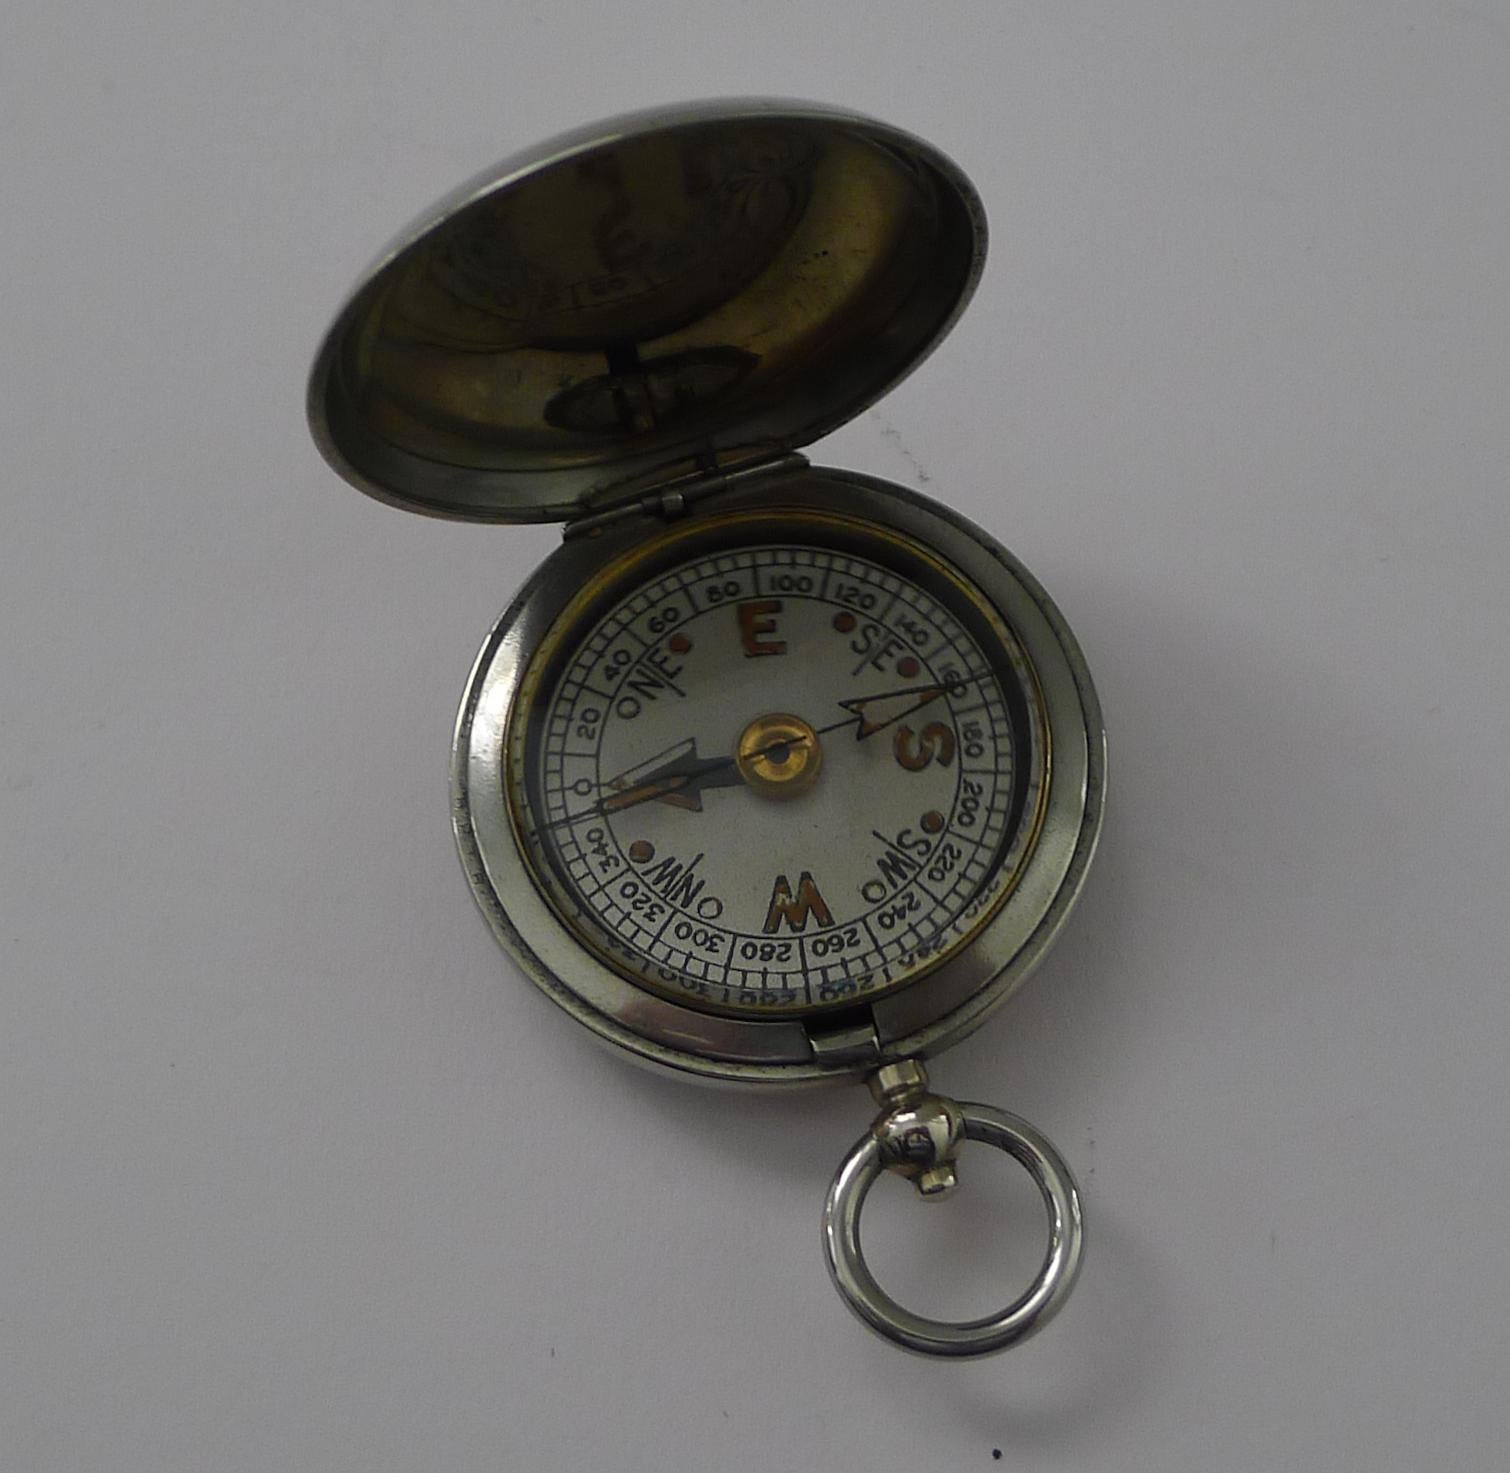 Nickel WW1 British Army Officer's Compass - C Haseler & Son c.1918